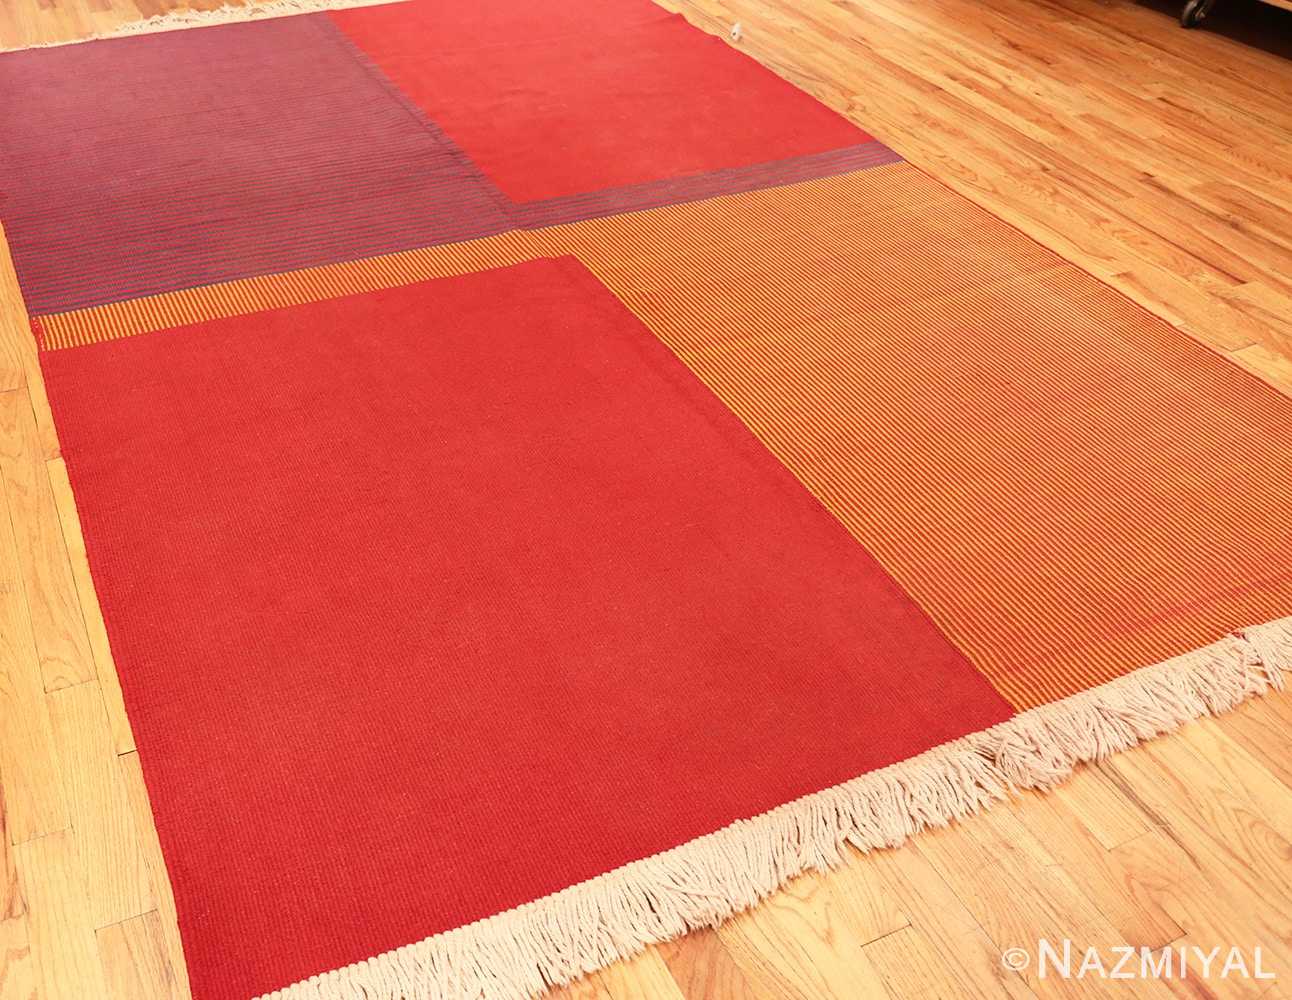 Overall Picture of Vintage French Art Deco Kilim Rug #49930 From Nazmiyal Antique Rugs in NYC